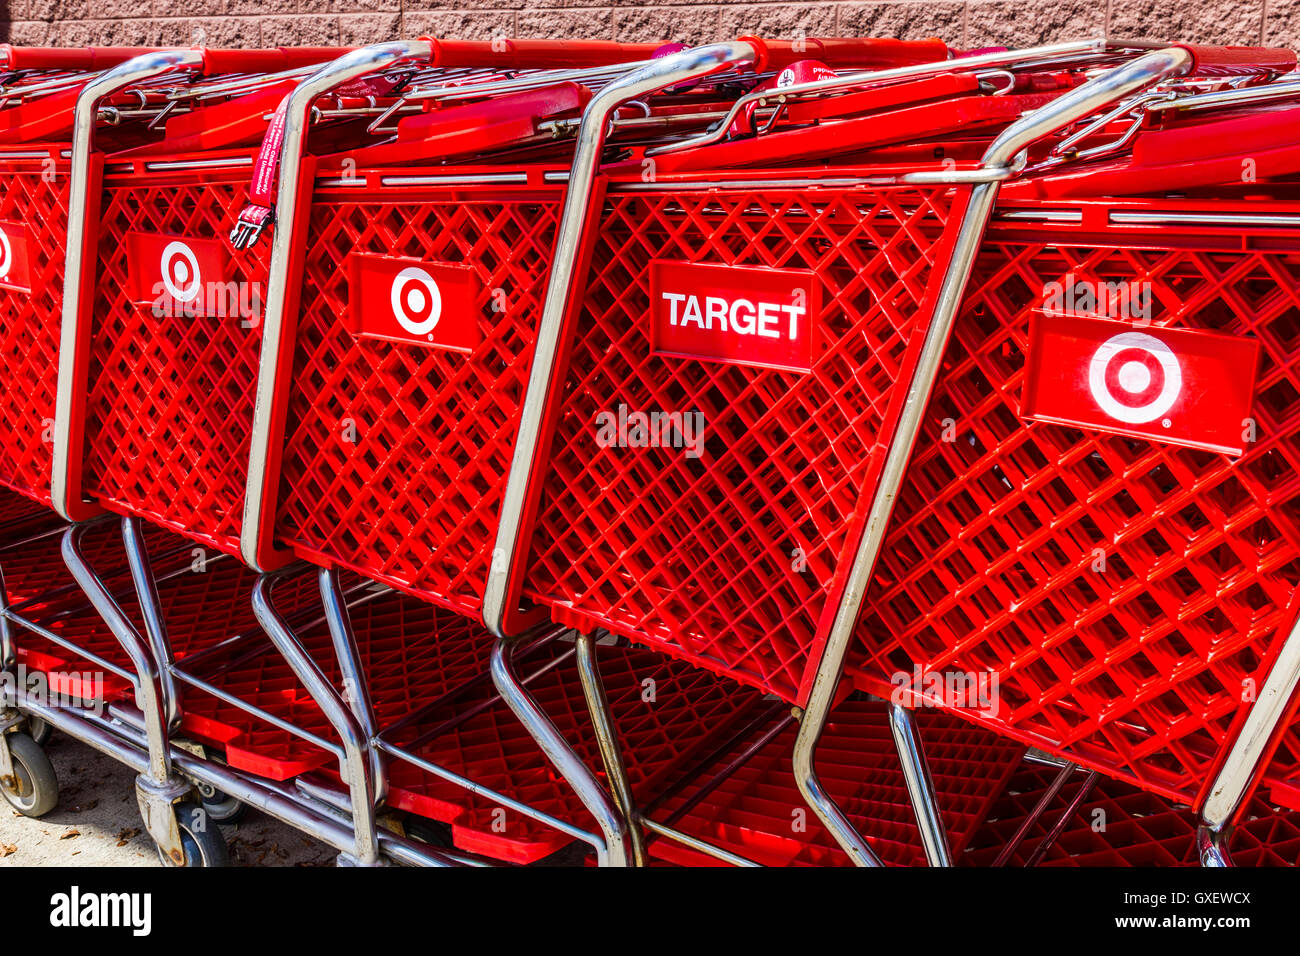 Indianapolis - Circa August 2016: Target Retail Store Baskets. Target Sells Home Goods, Clothing and Electronics VI Stock Photo